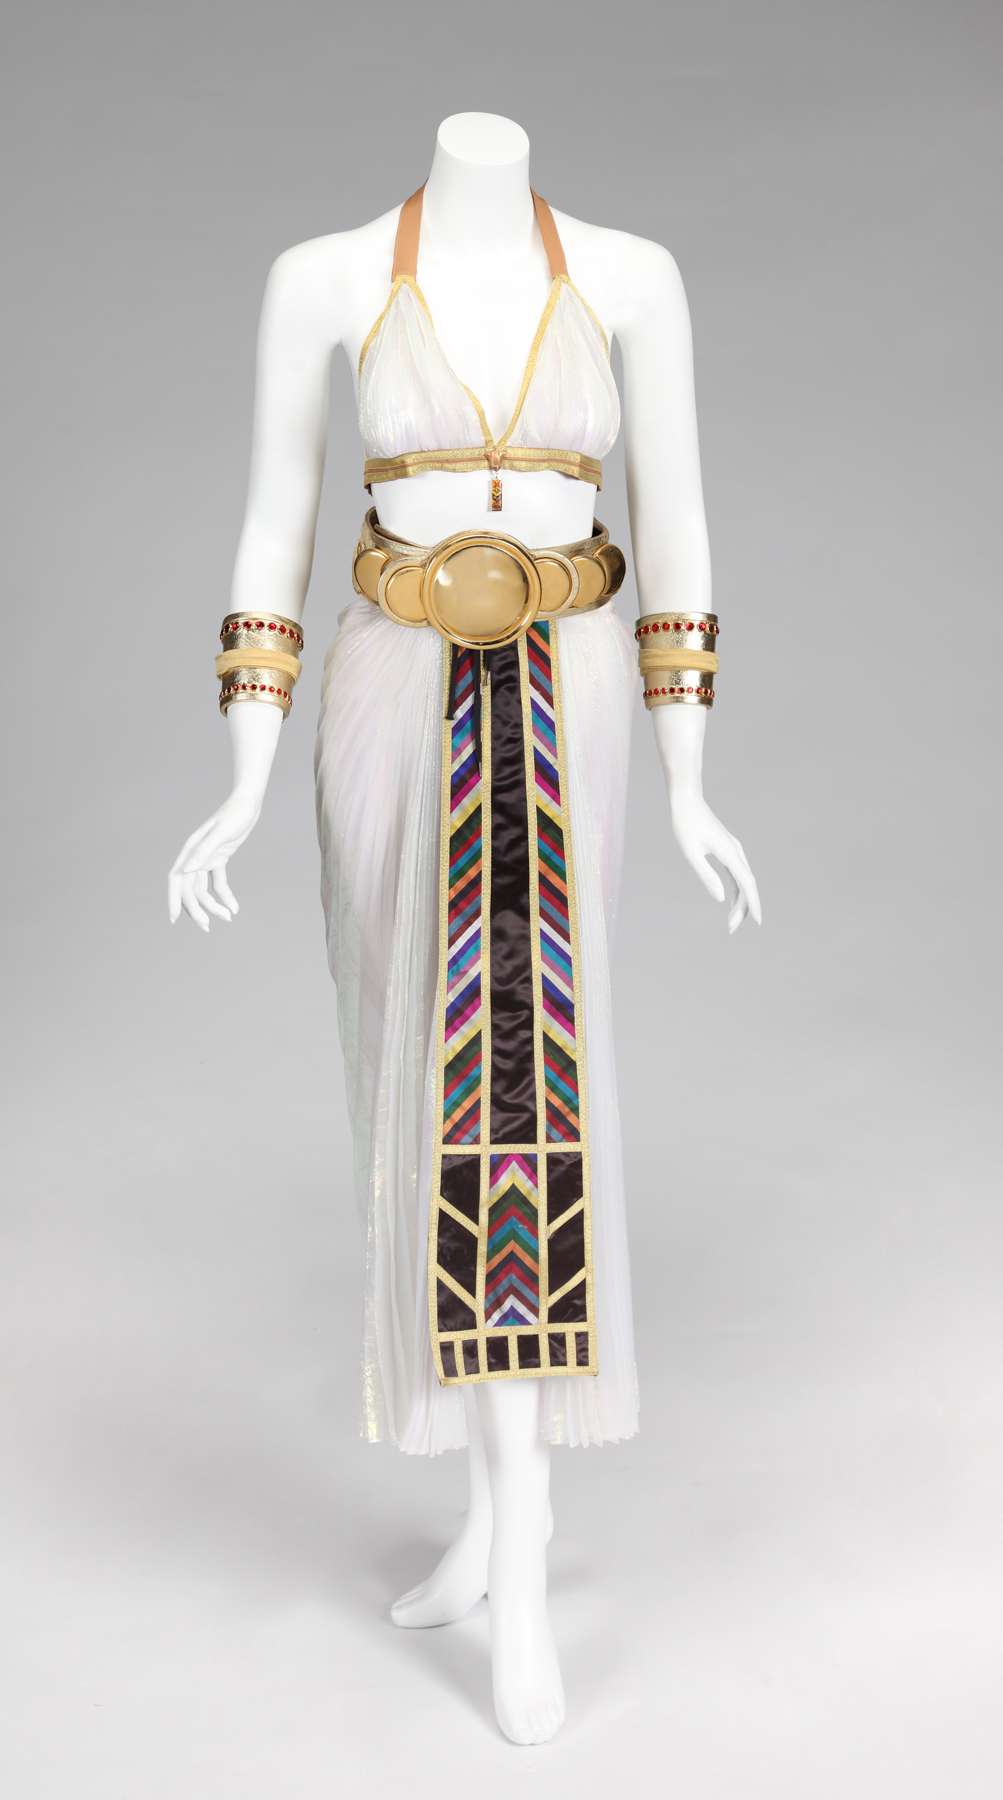 MICHAEL JACKSON: "REMEMBER THE TIME" COSTUMES  A group of costumes worn for the performance of